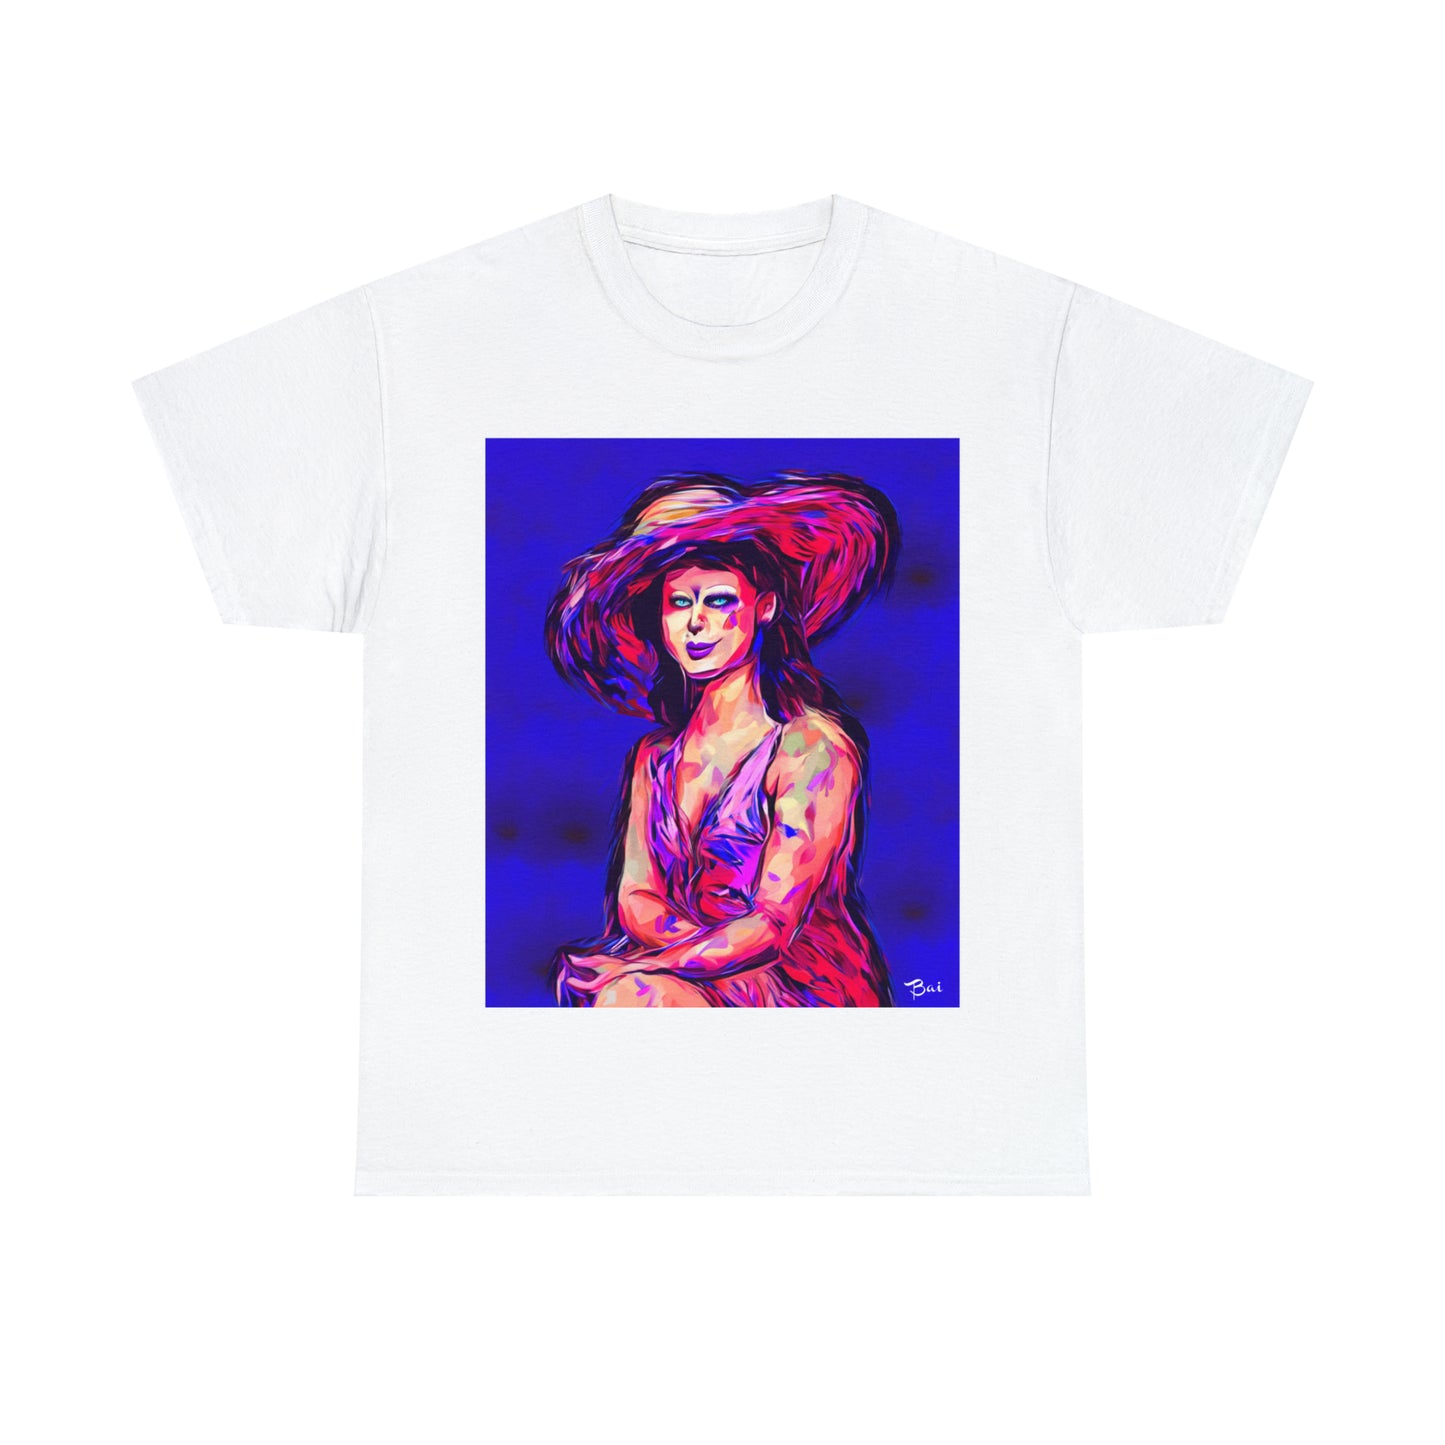 LADY IN SUN HAT - Airt on a Shirt  - Unisex Heavy Cotton Tee - AUS